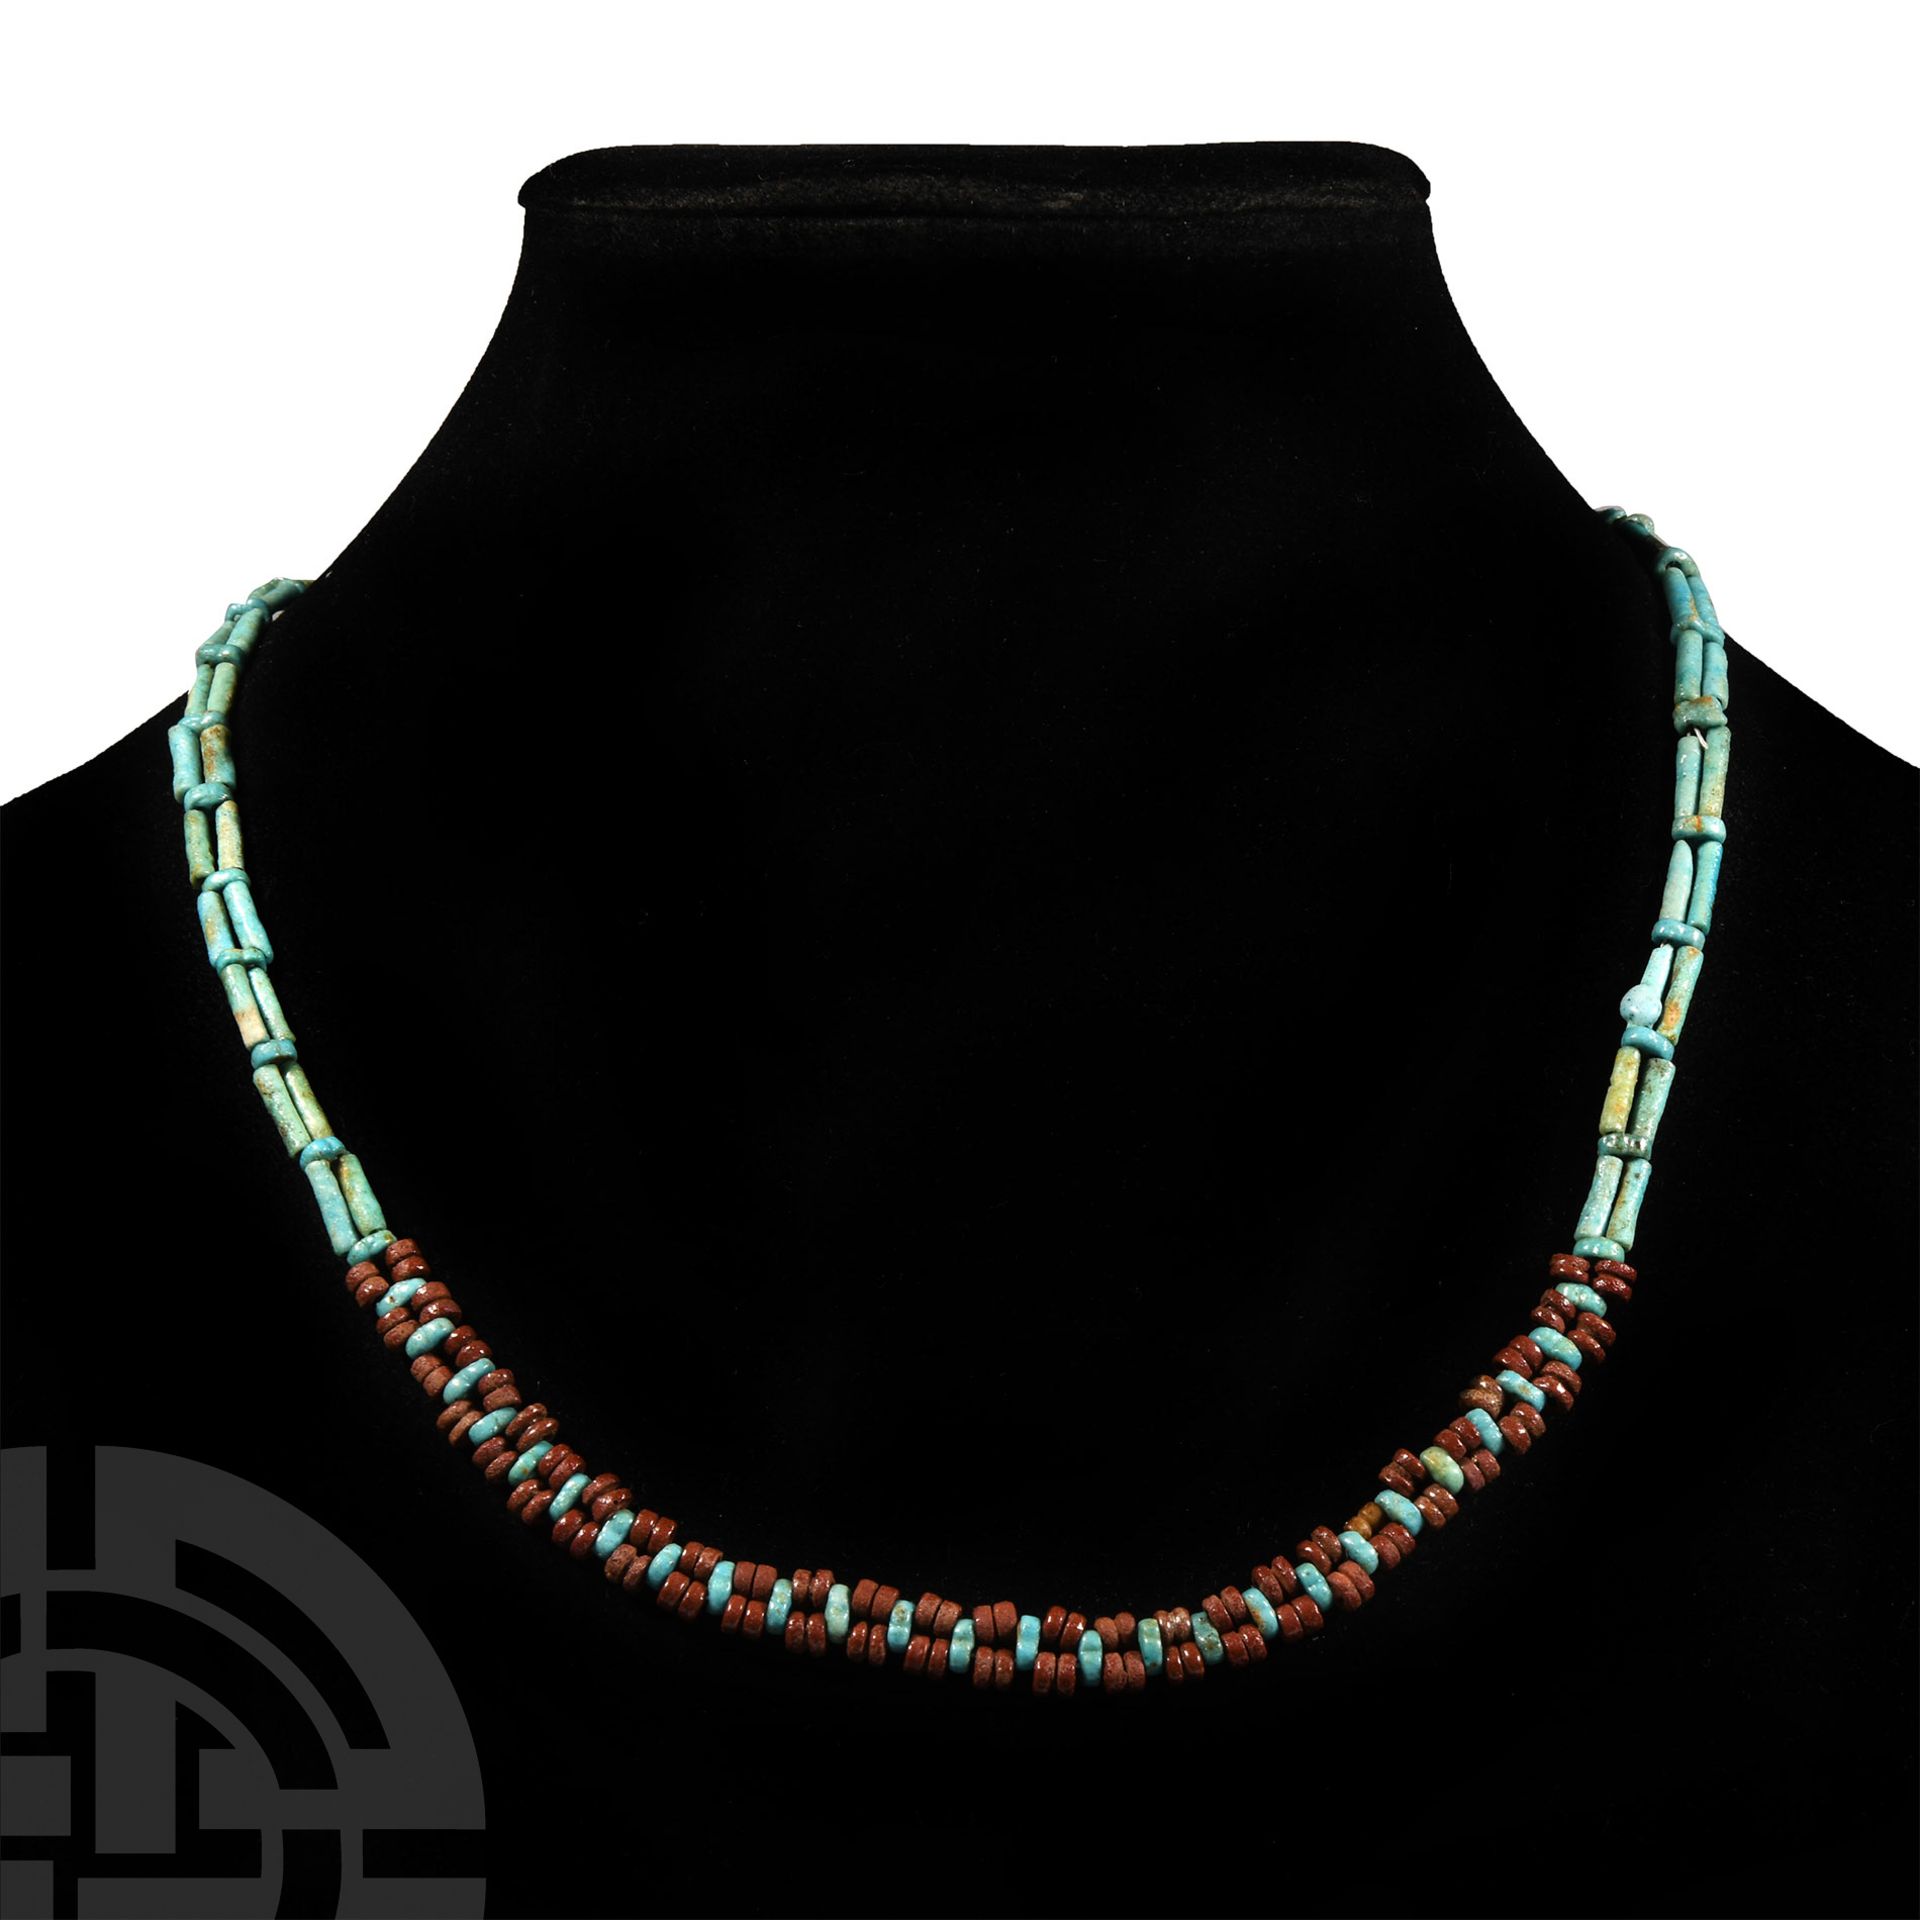 Egyptian Faience Mummy Bead Necklace - Image 2 of 2